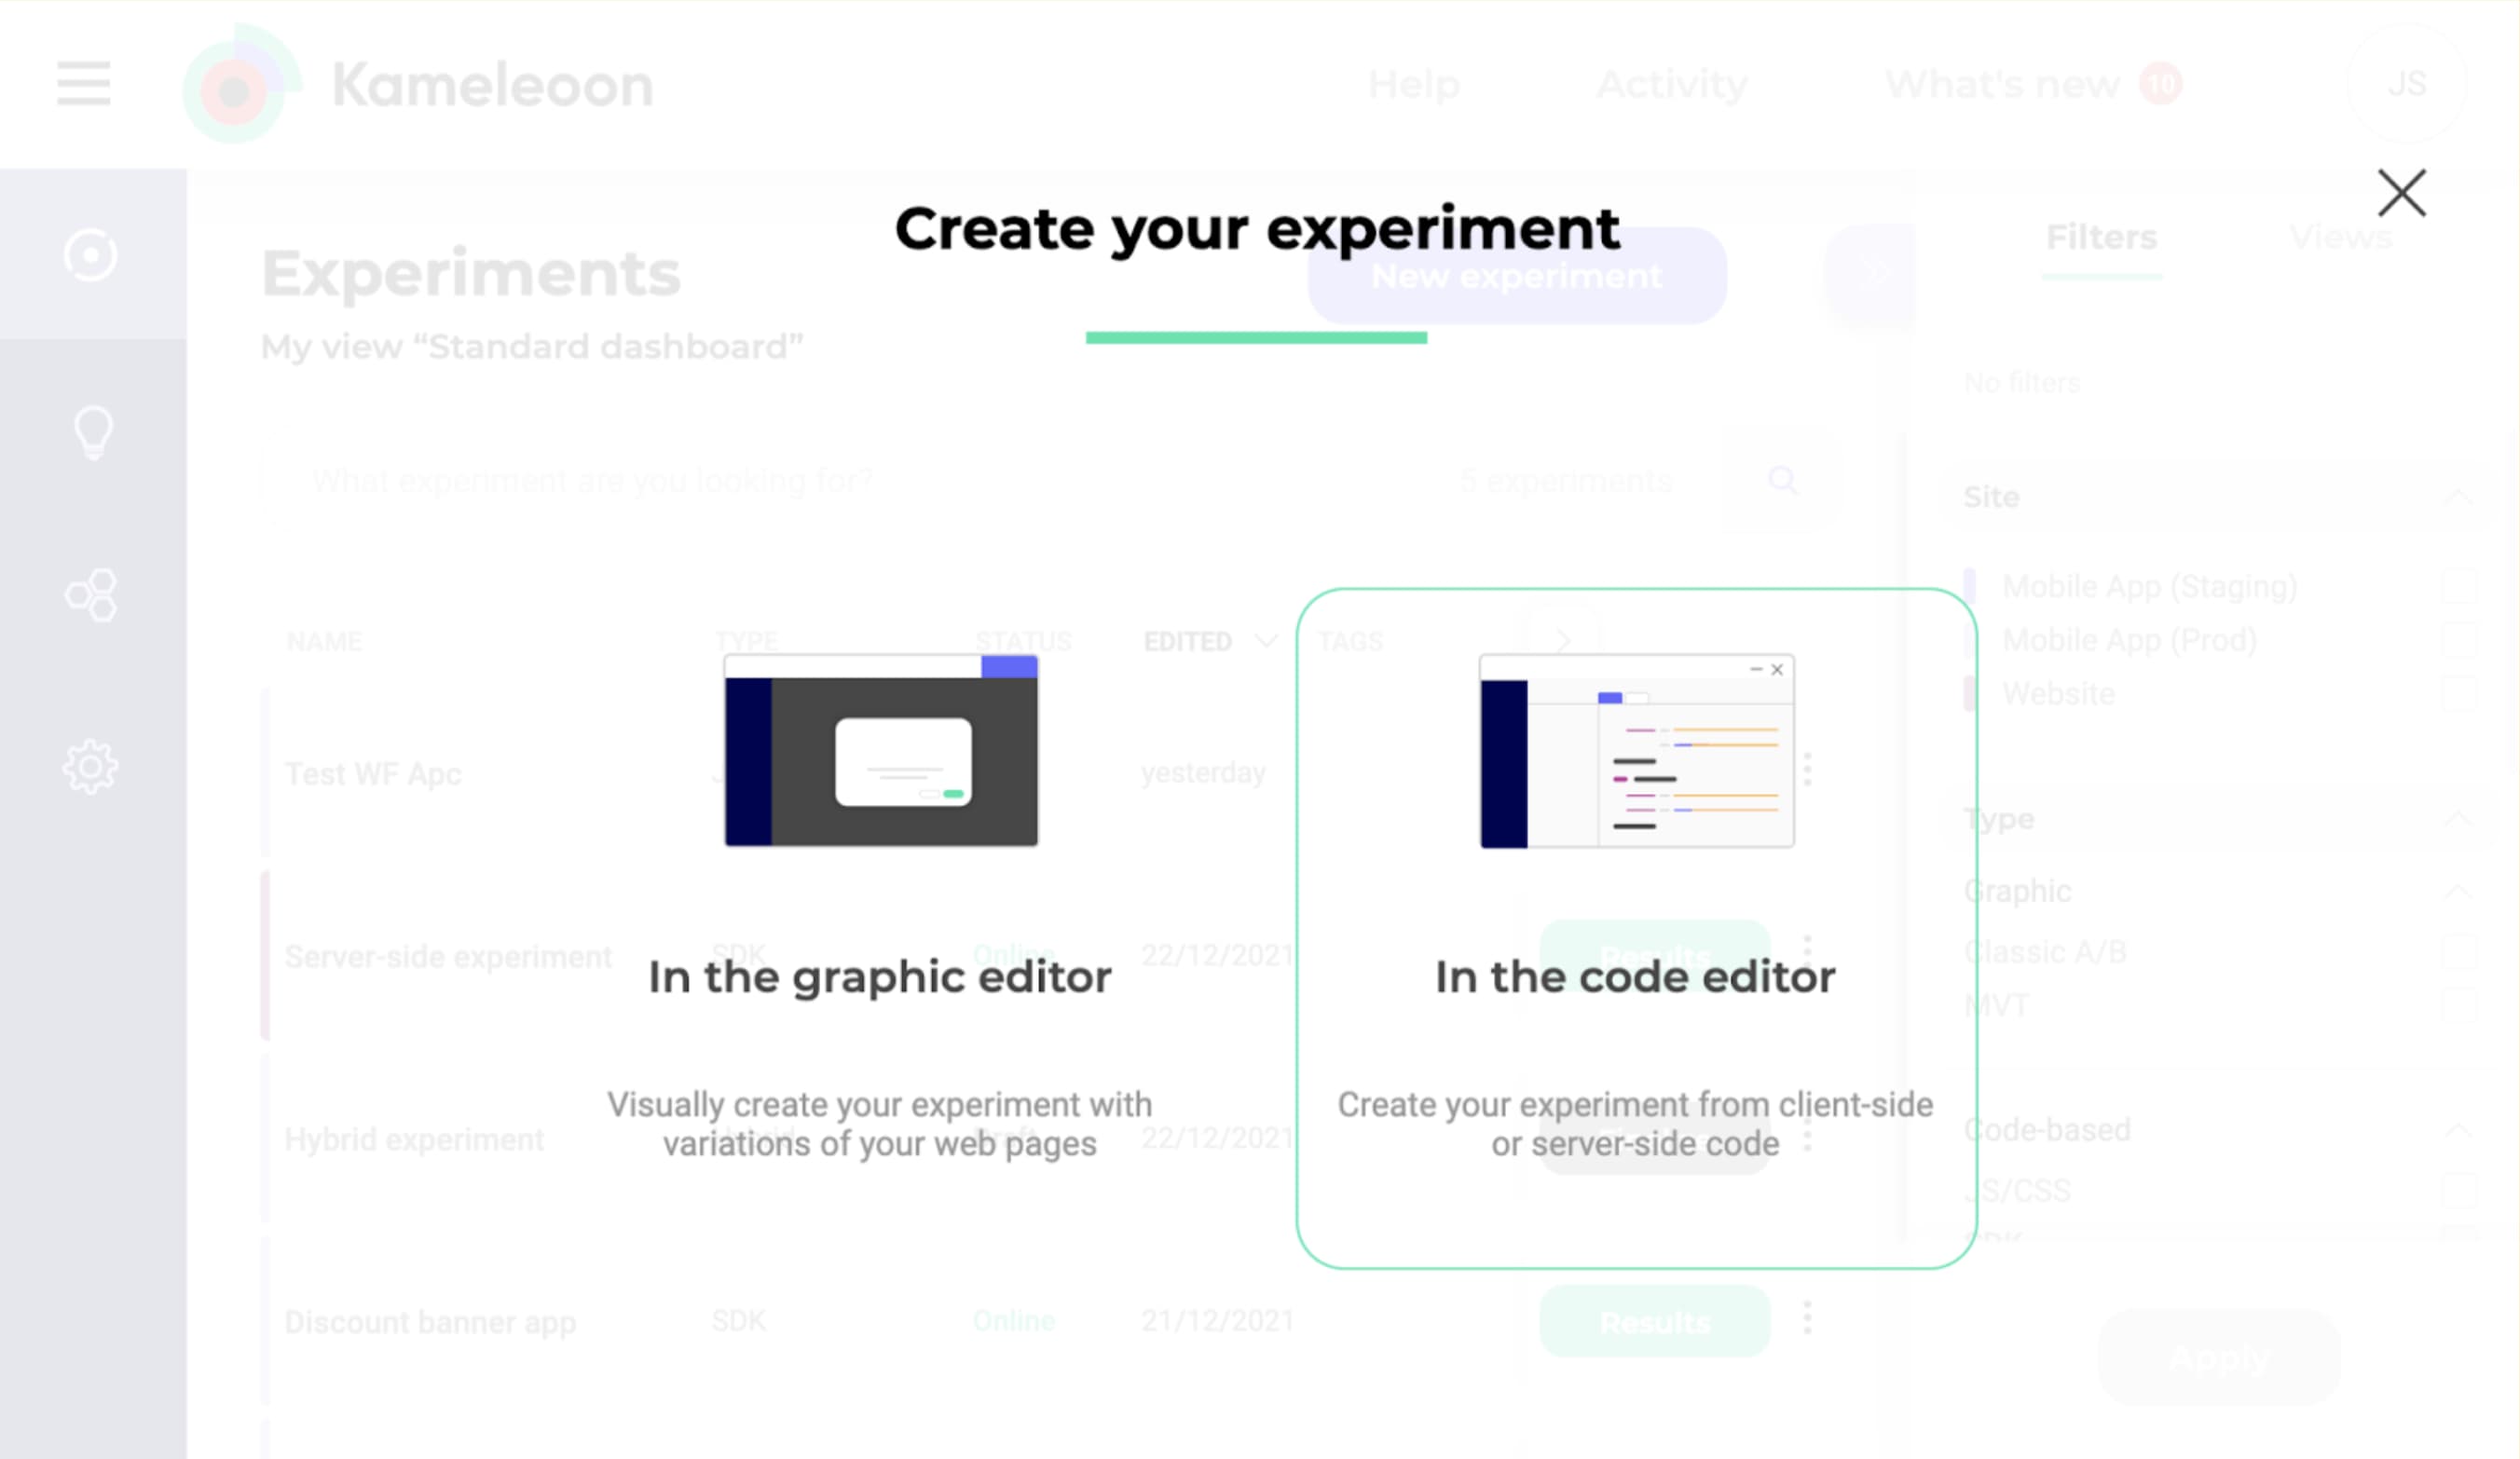 How to do experimentation with the code editor